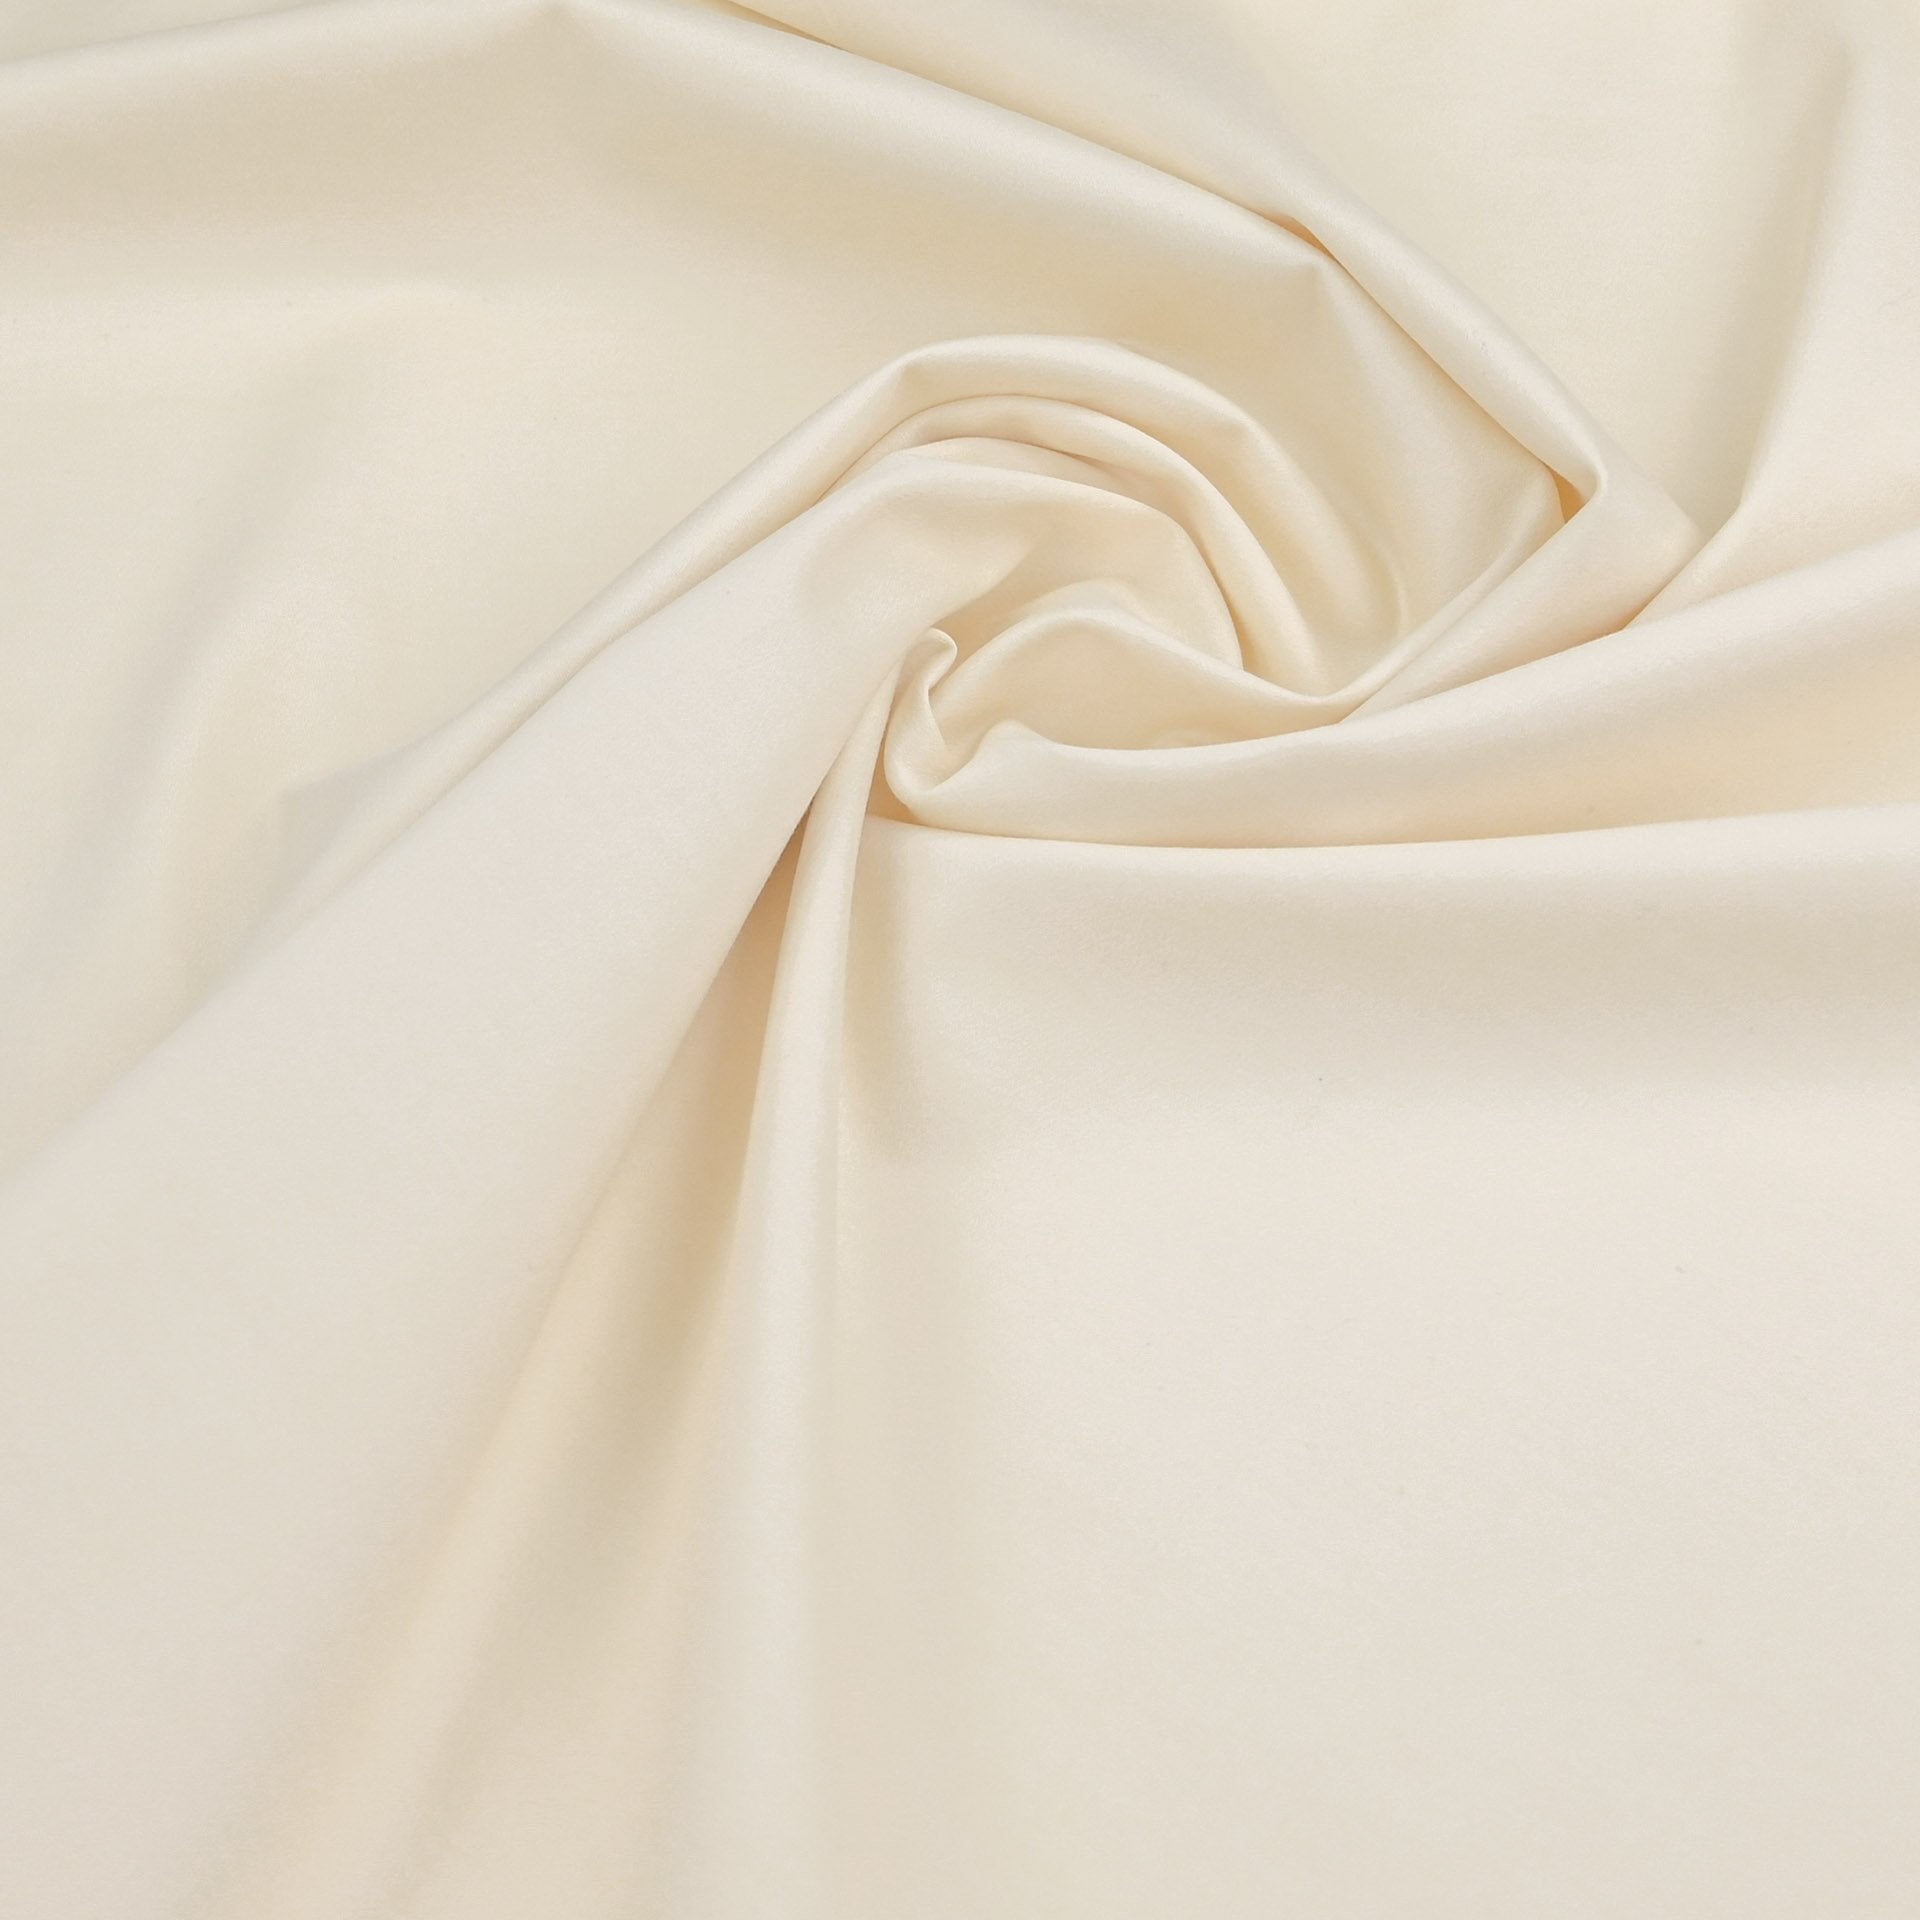 Cotton Elastane Fabric - What Garments Is It Suitable For?